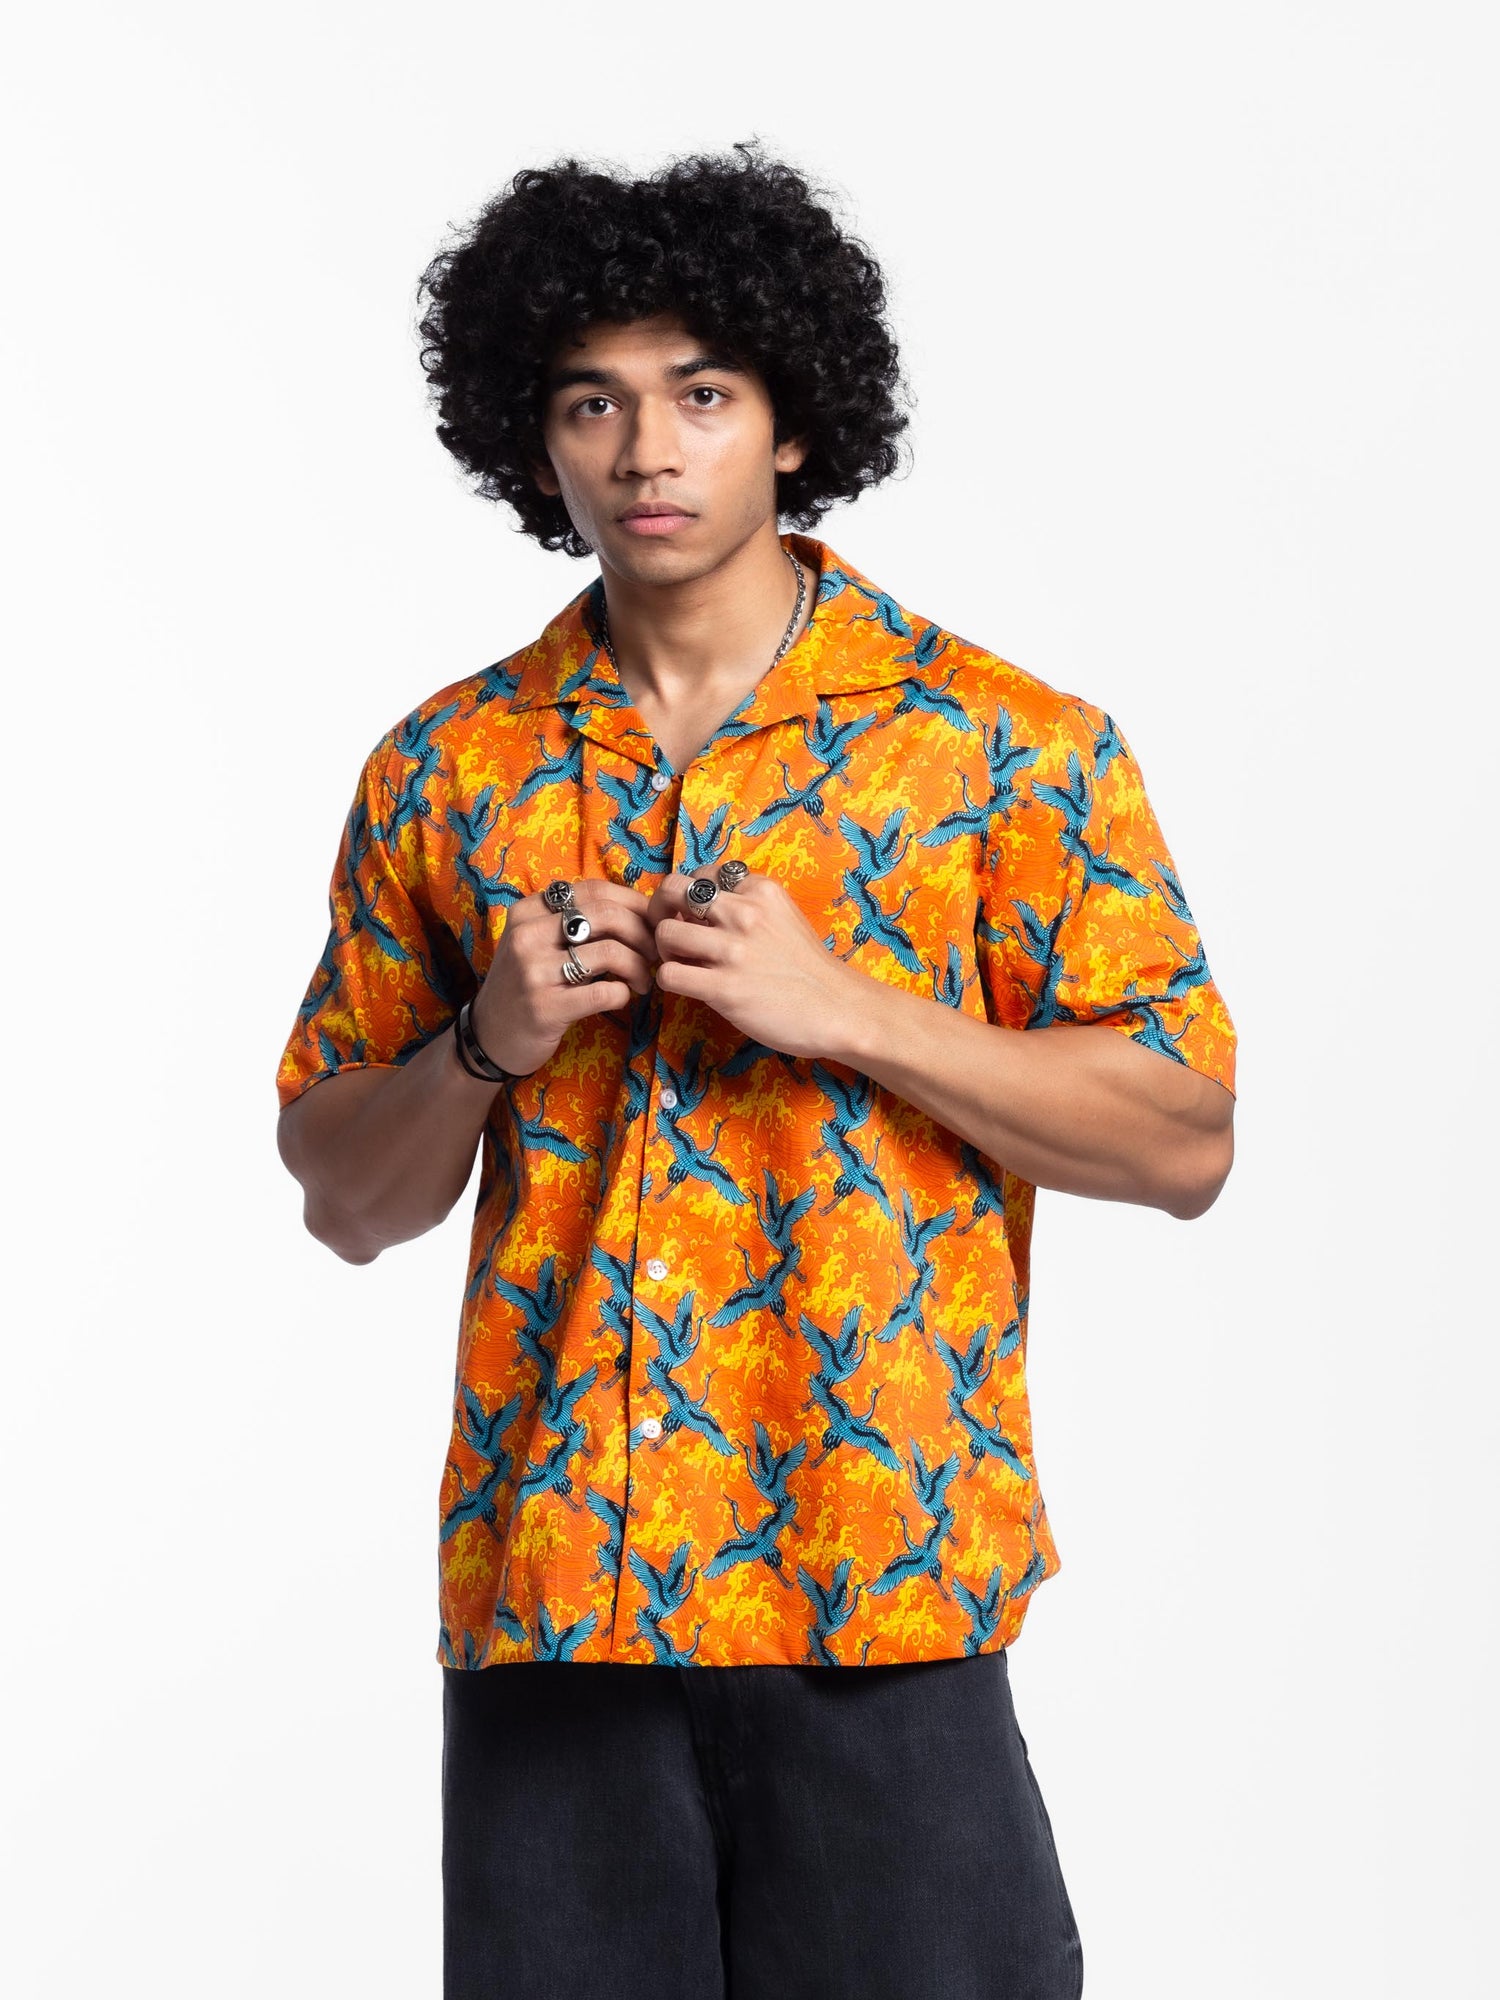 Printed Oversized T-Shirts for Men - Nooob Lifestyle